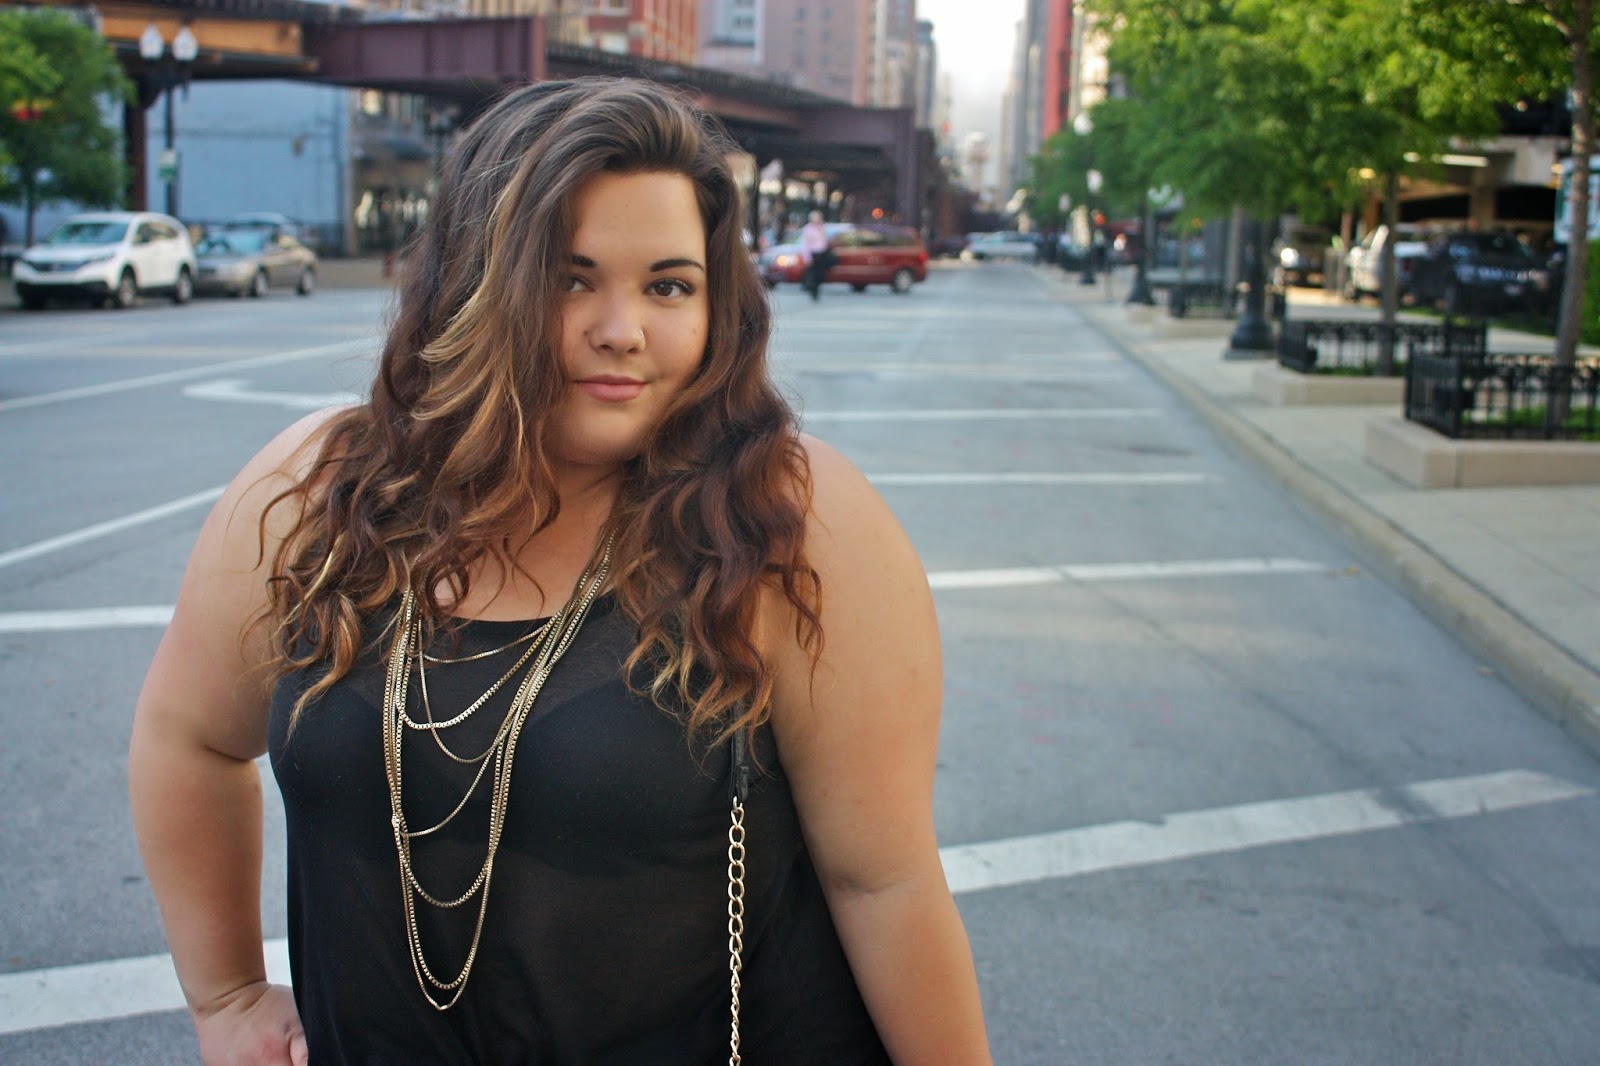 stylzoo, plus size fashion blogger, plus size fashion, Forever21, gold chain, see through, maxi skirt, stripes, summer fashion, natalie craig, natalie in the city, chicago, black ensemble, all black everything, plus size retailer, ootd, outfit of the day, spikes, clutch, H&M, curly hair, ombre hair